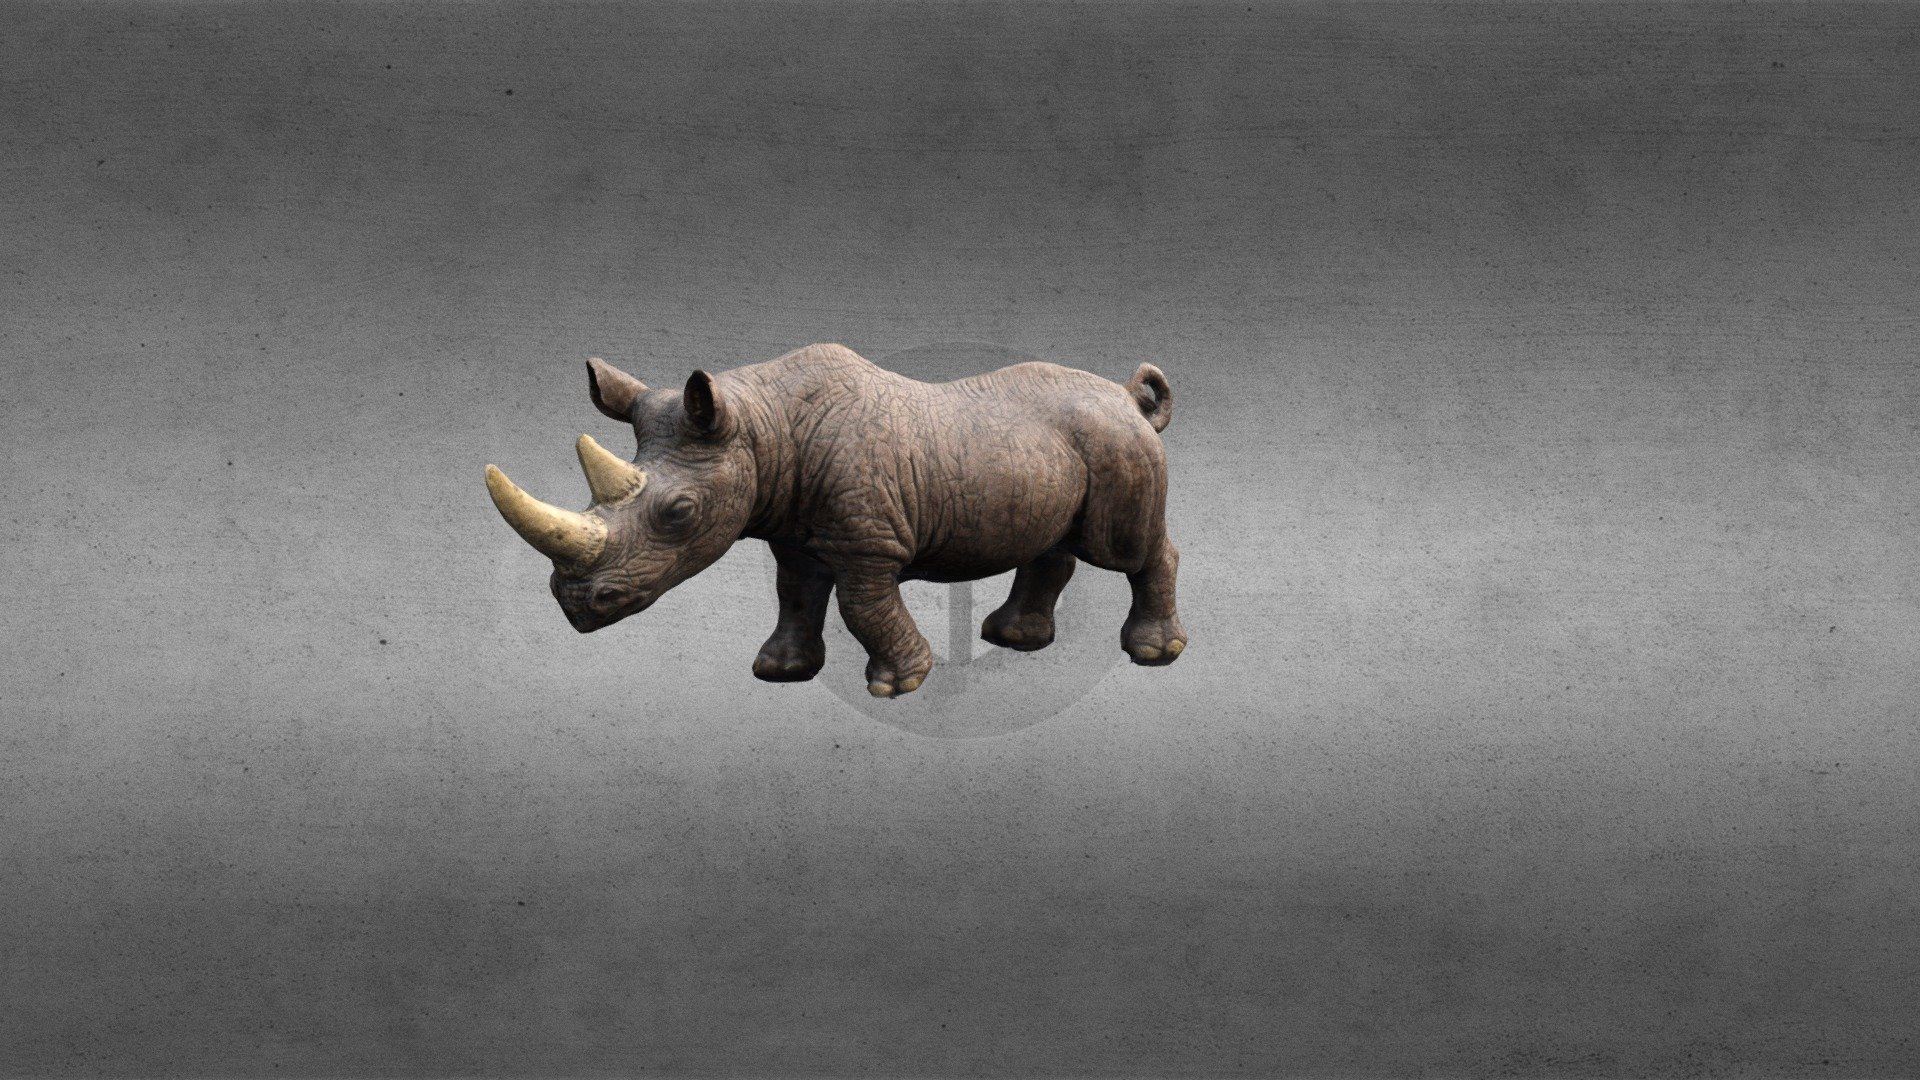 Rhinoceros 3D 7.30.23163.13001 download the new version for ios